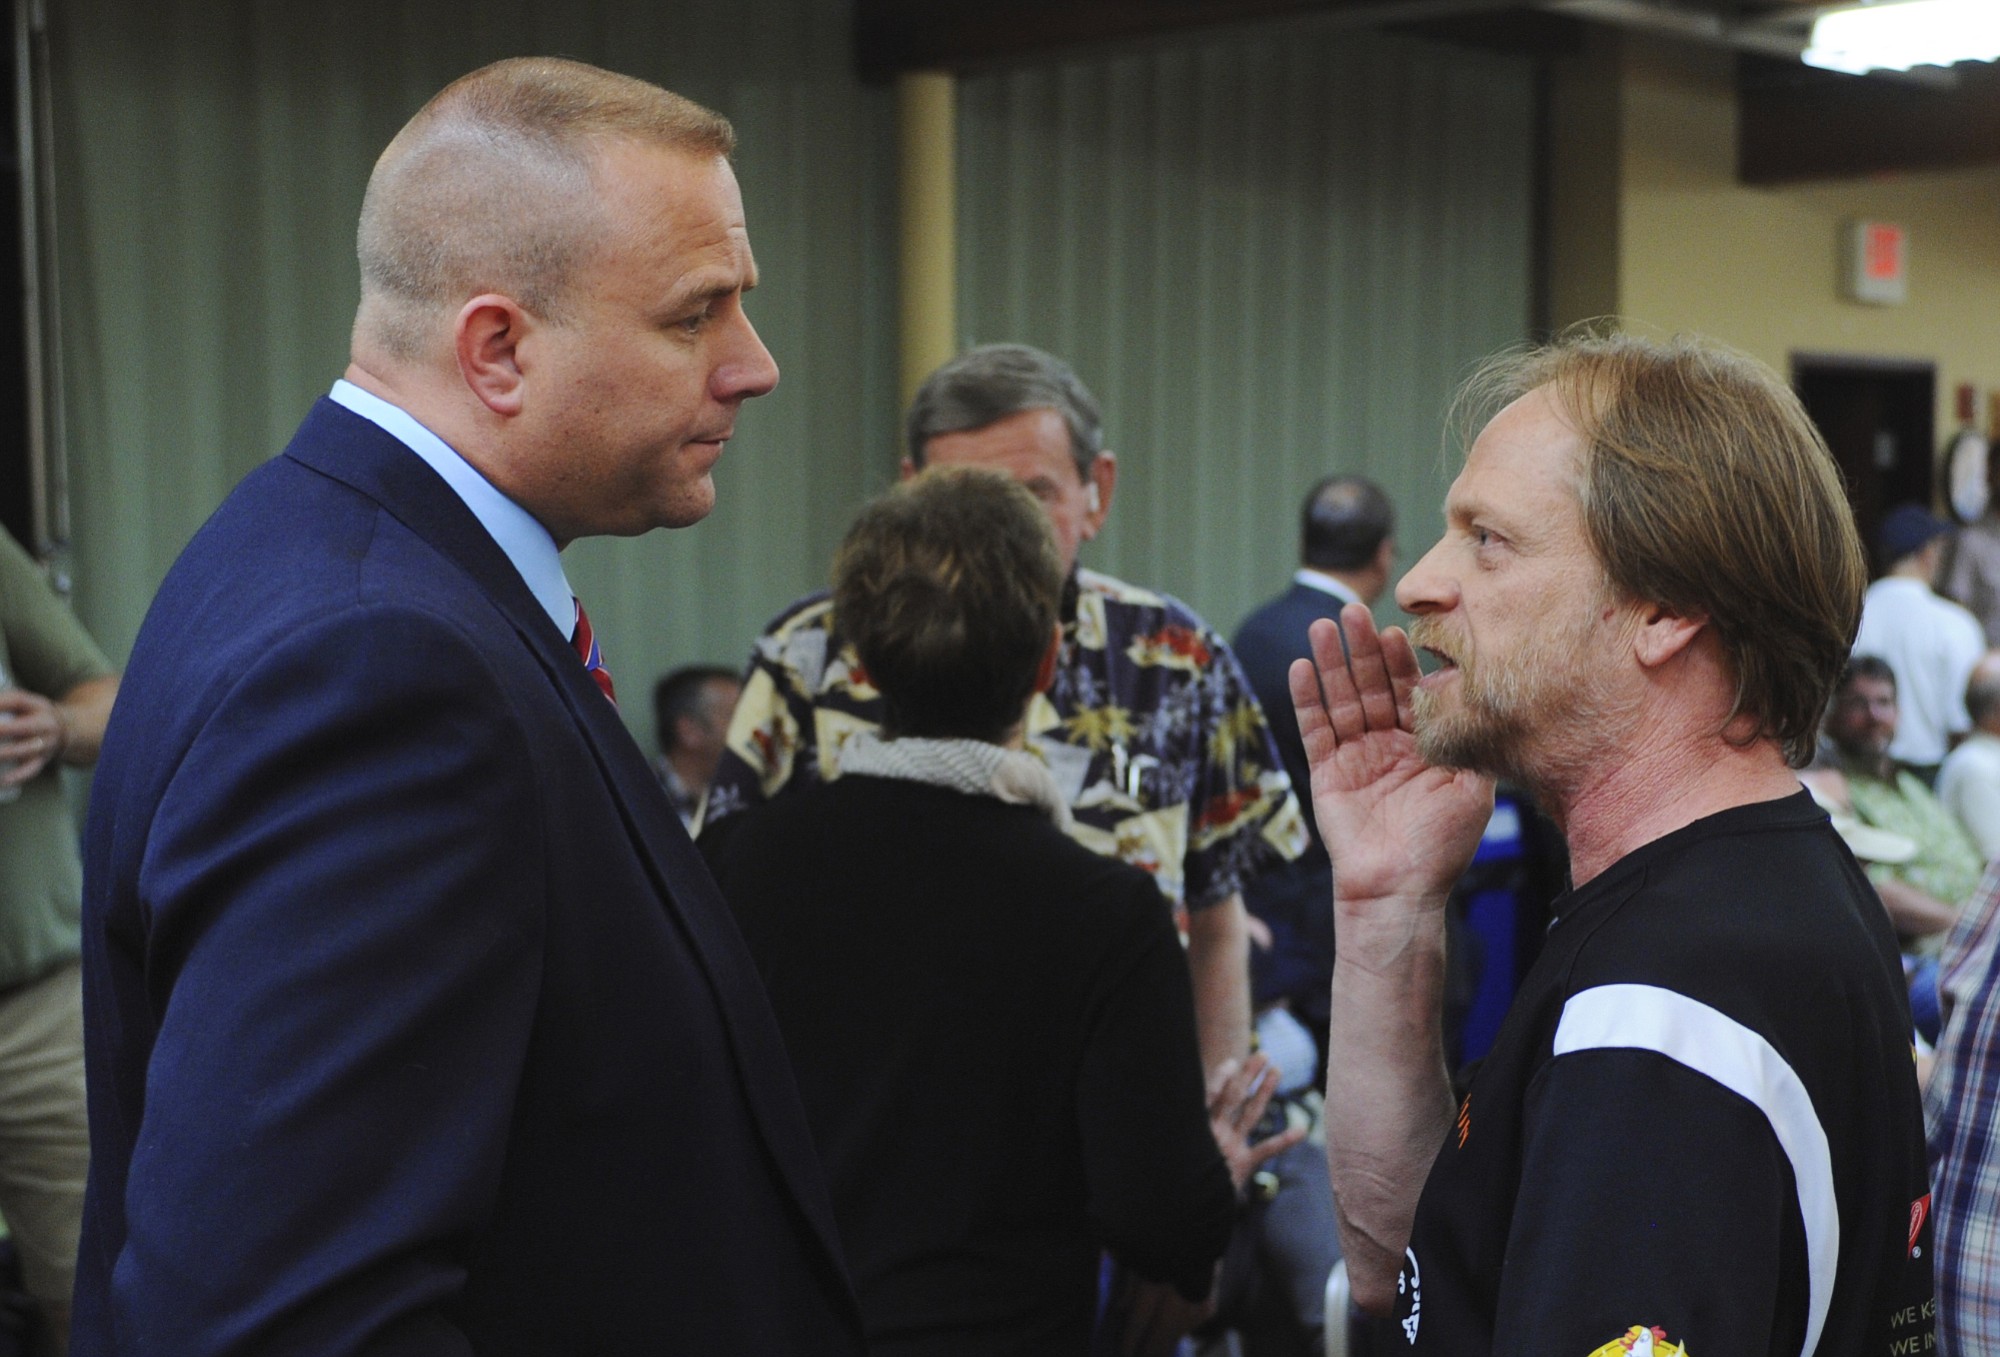 Shane Gardner, left, who lost a November bid for Clark County sheriff, has been hired as the new school safety and security manager at Evergreen Public Schools.